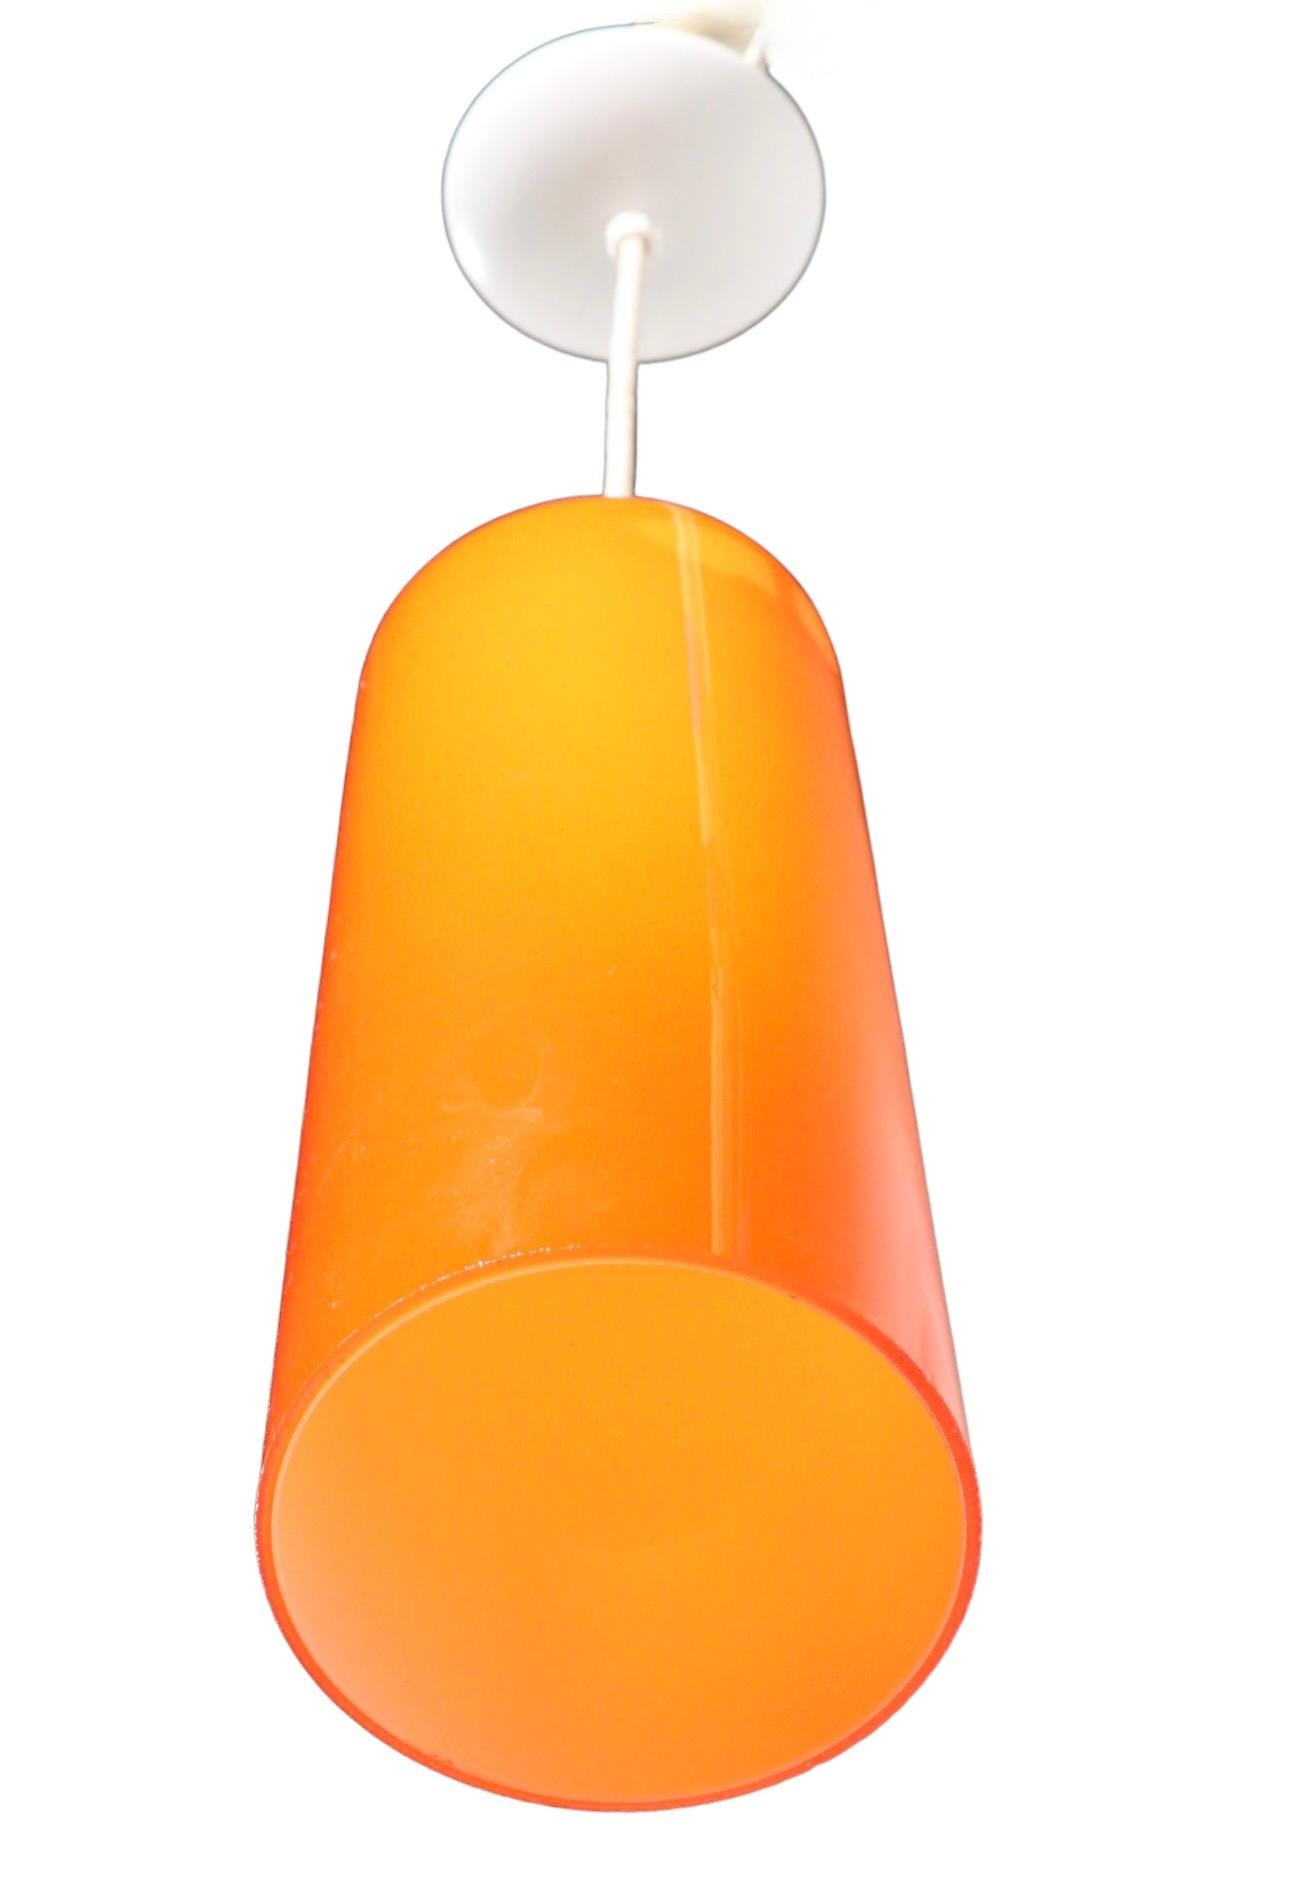 Stunning orange glass cylinder hanging fixture attributed to Prescolite. The chandelier is in very fine, original, clean, working and ready to install condition. It accepts a standard size screw in bulb, and comes complete with white rubberized